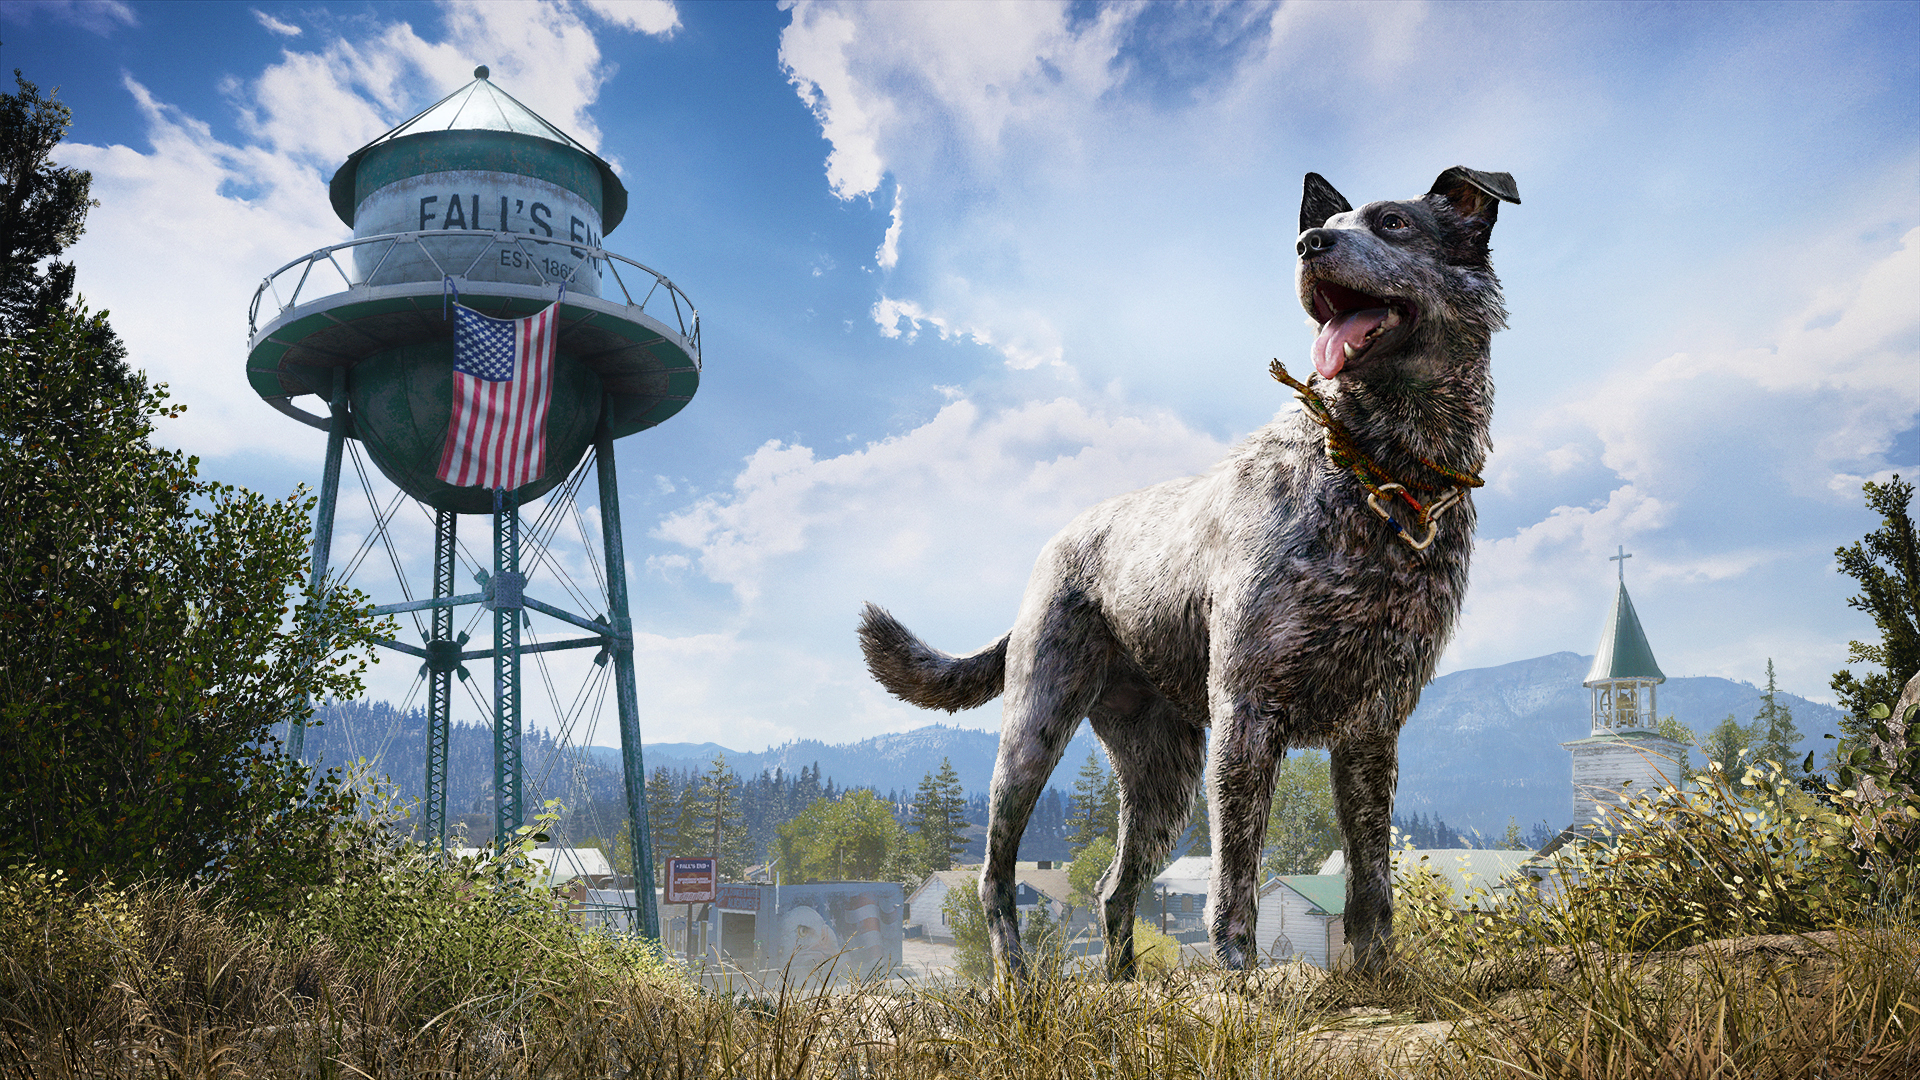 Far Cry 5 for PC Buy